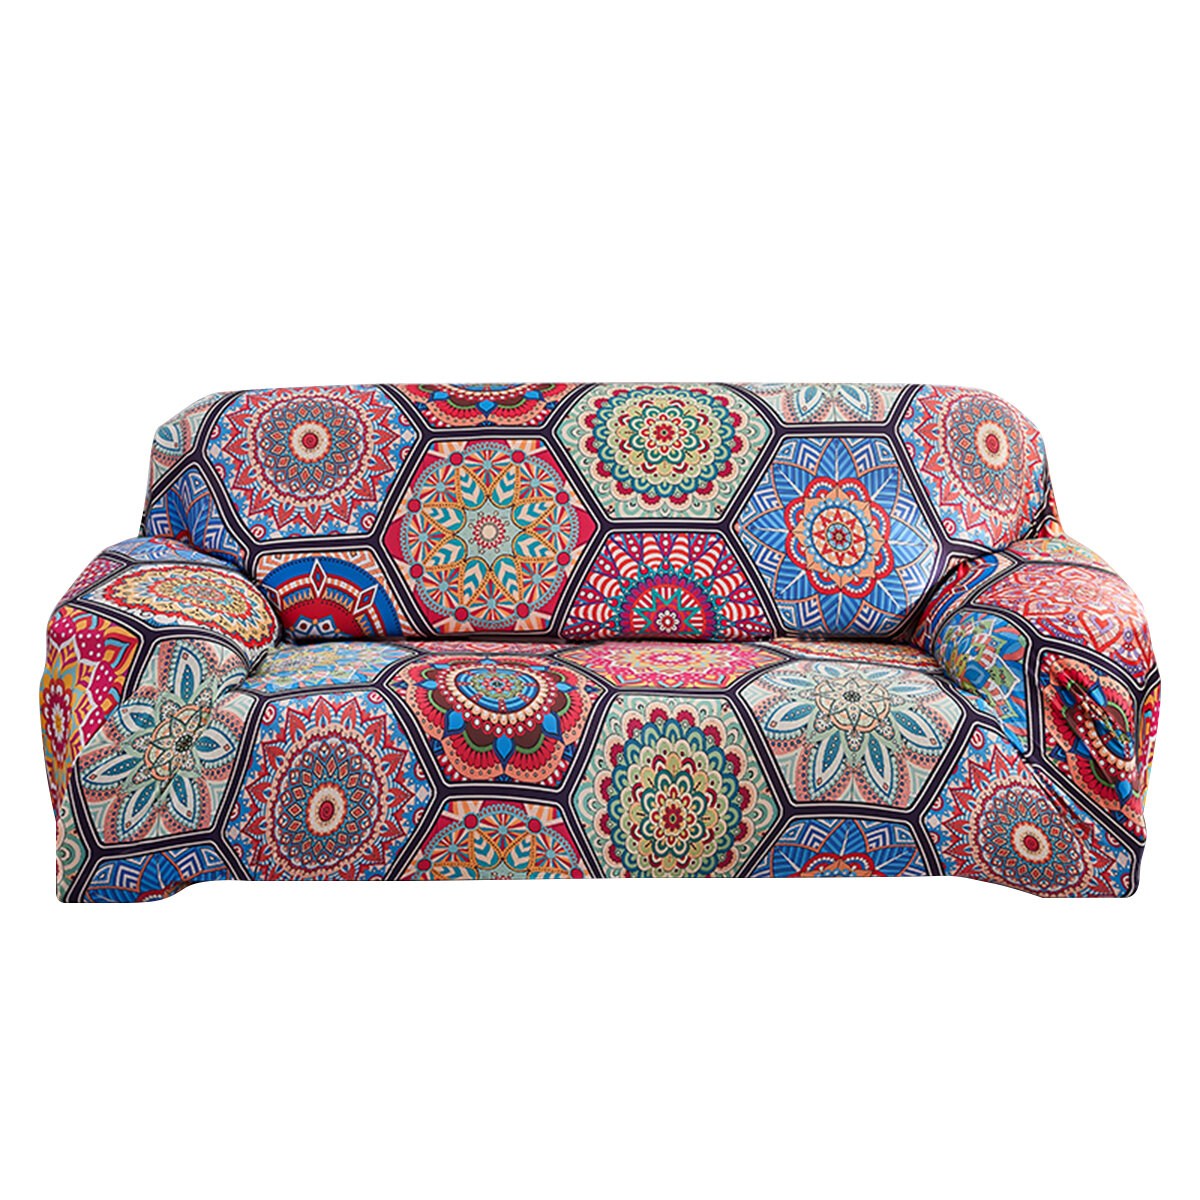 1/2/3/4 Seaters Elastic Sofa Cover Universal Bohemian Chair Seat Protector Couch Case Stretch Slipcover Home Office Furn